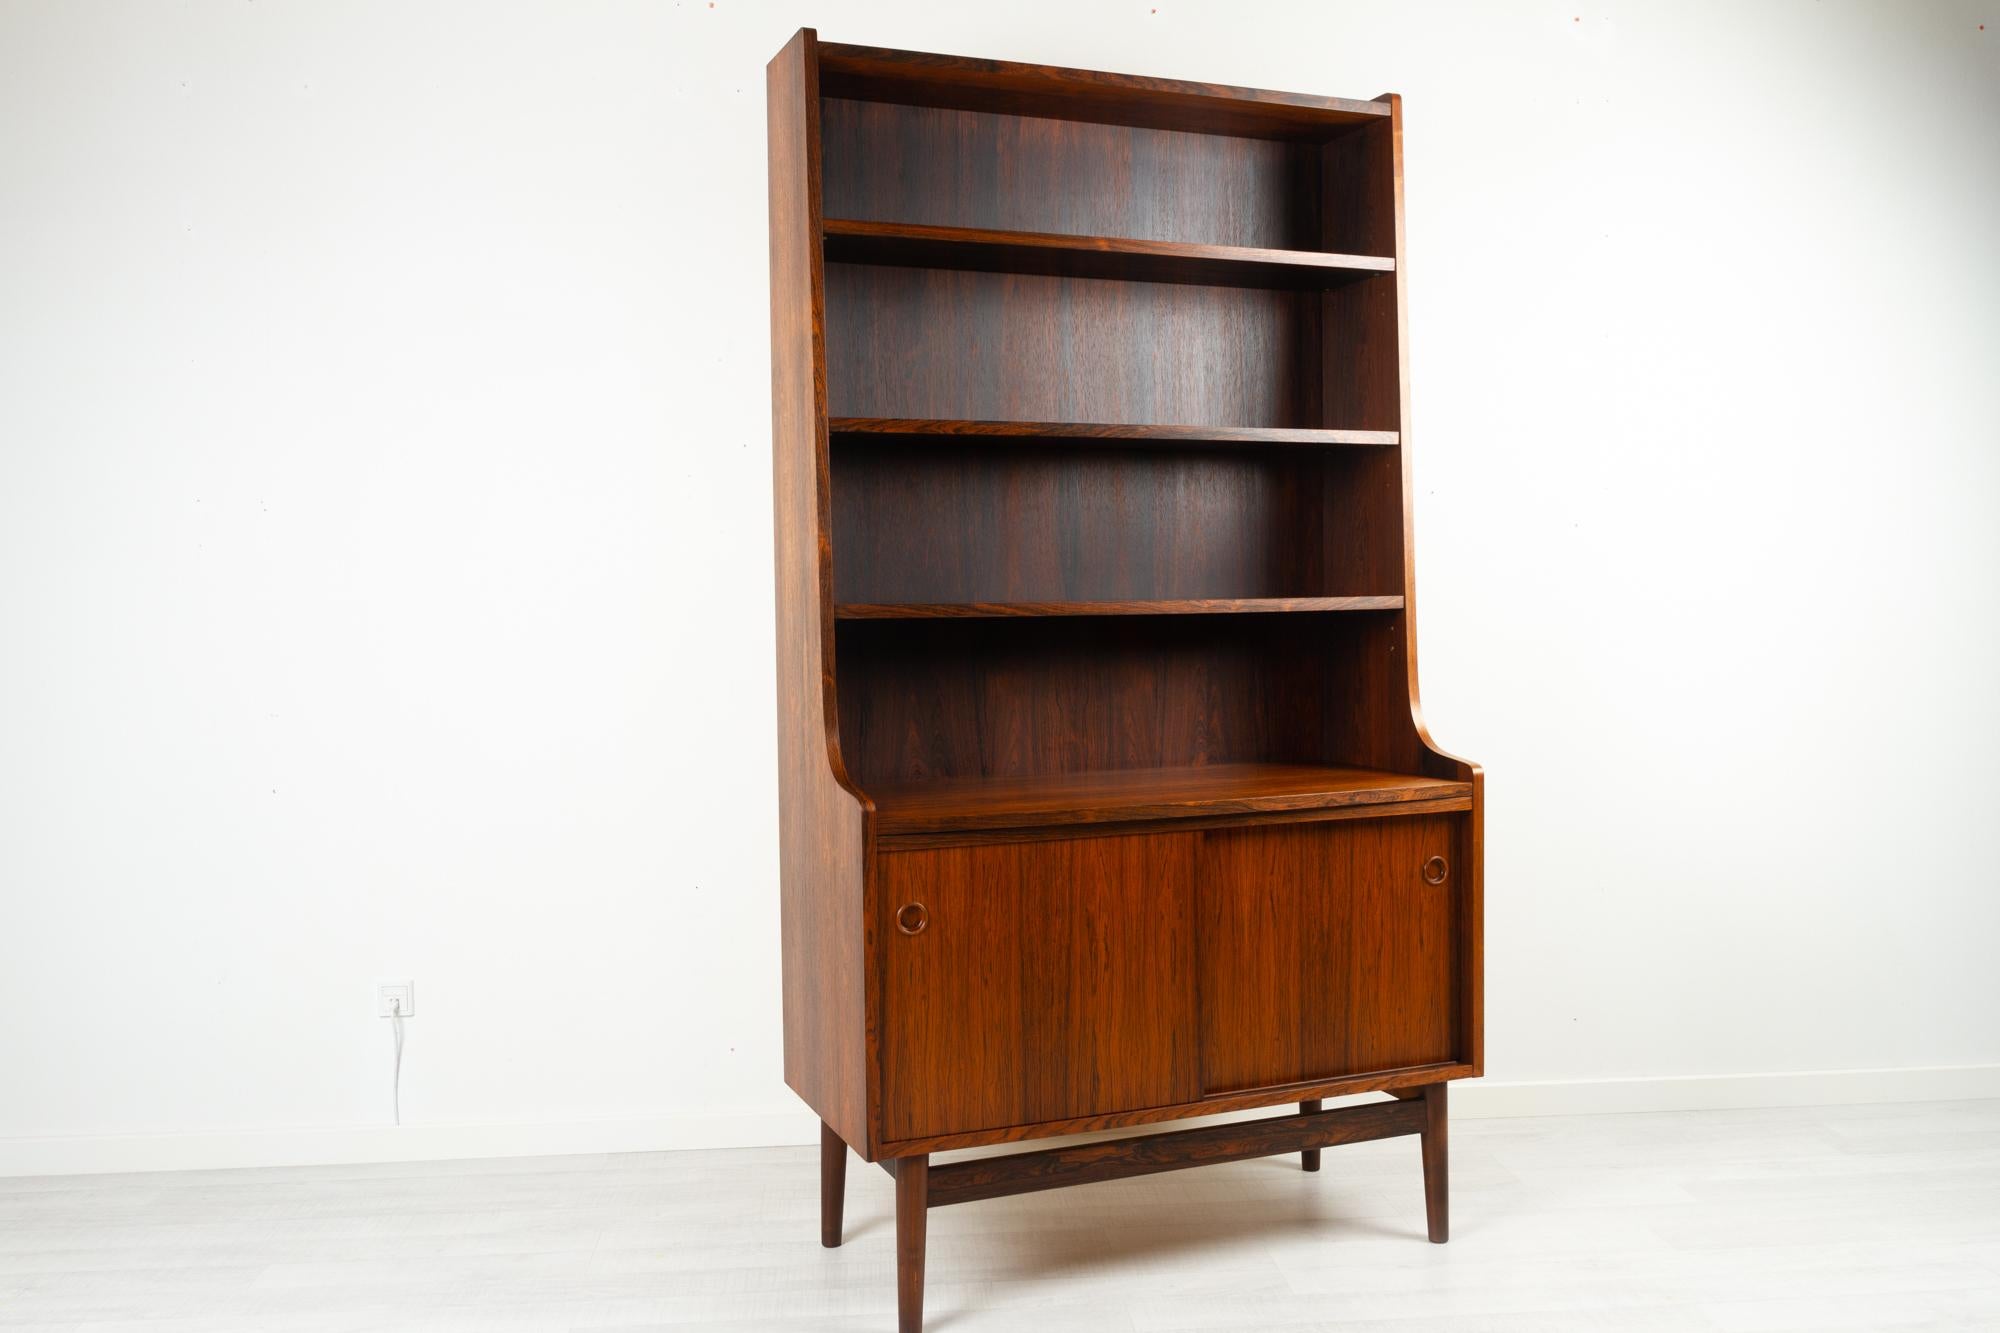 Danish rosewood bookcase by Johannes Sorth for Nexø Møbelfabrik, Bornholm, Denmark 1960s. 
Danish Mid-Century Modern bookcase in rosewood. Cabinet with double sliding doors and one height adjustable shelf. Top with three height adjustable